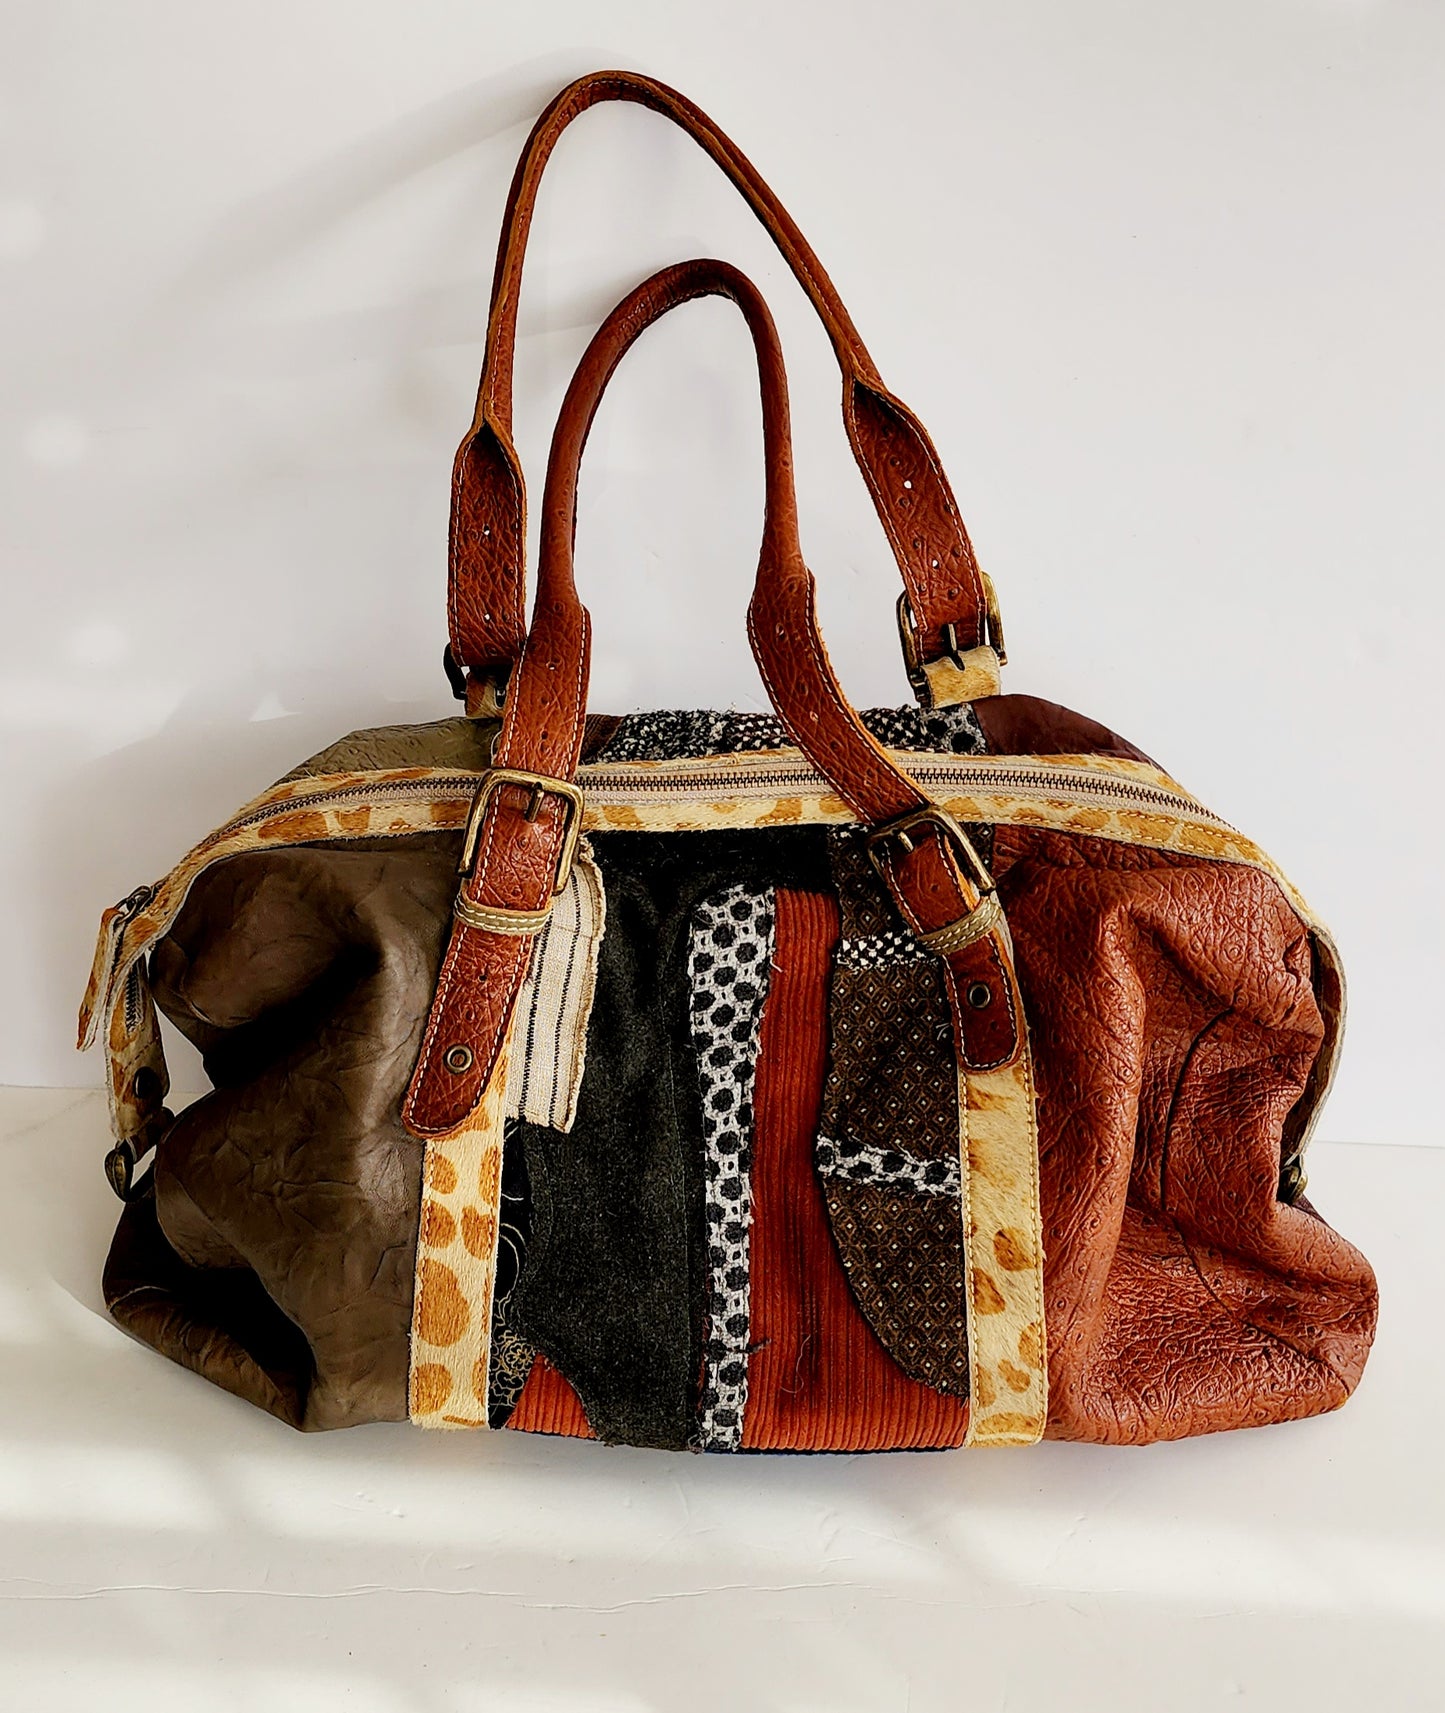 Handmade Patchwork Duffle Bag in Leather & Fabric by Frankie Slaughter